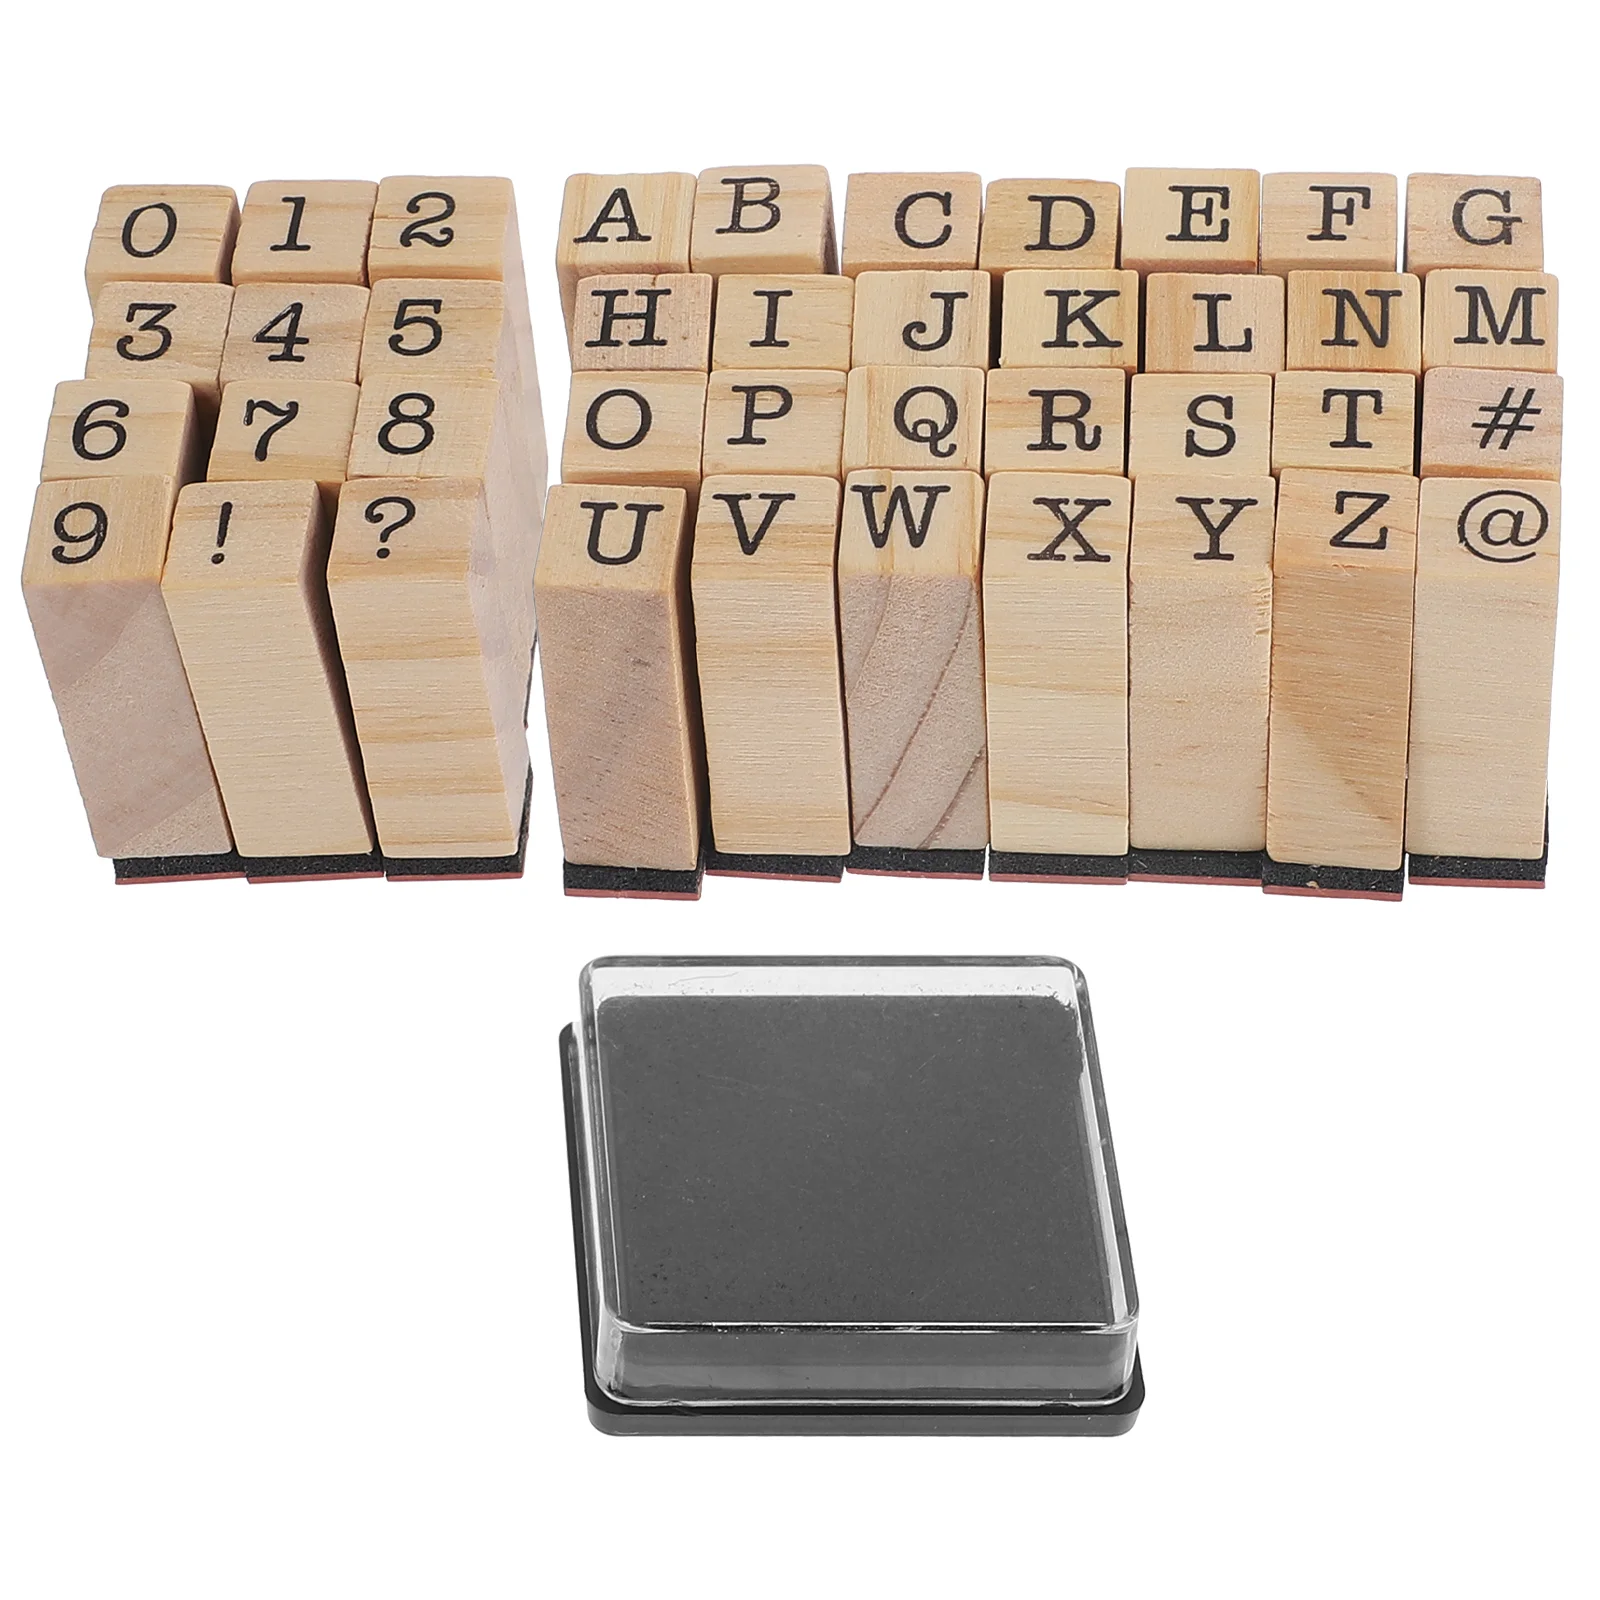 

40 Pcs Alphanumeric Stamp Scrapbook Stamps Letter for Wood Handbook Alphabet Crafting Supplies Wooden Letters